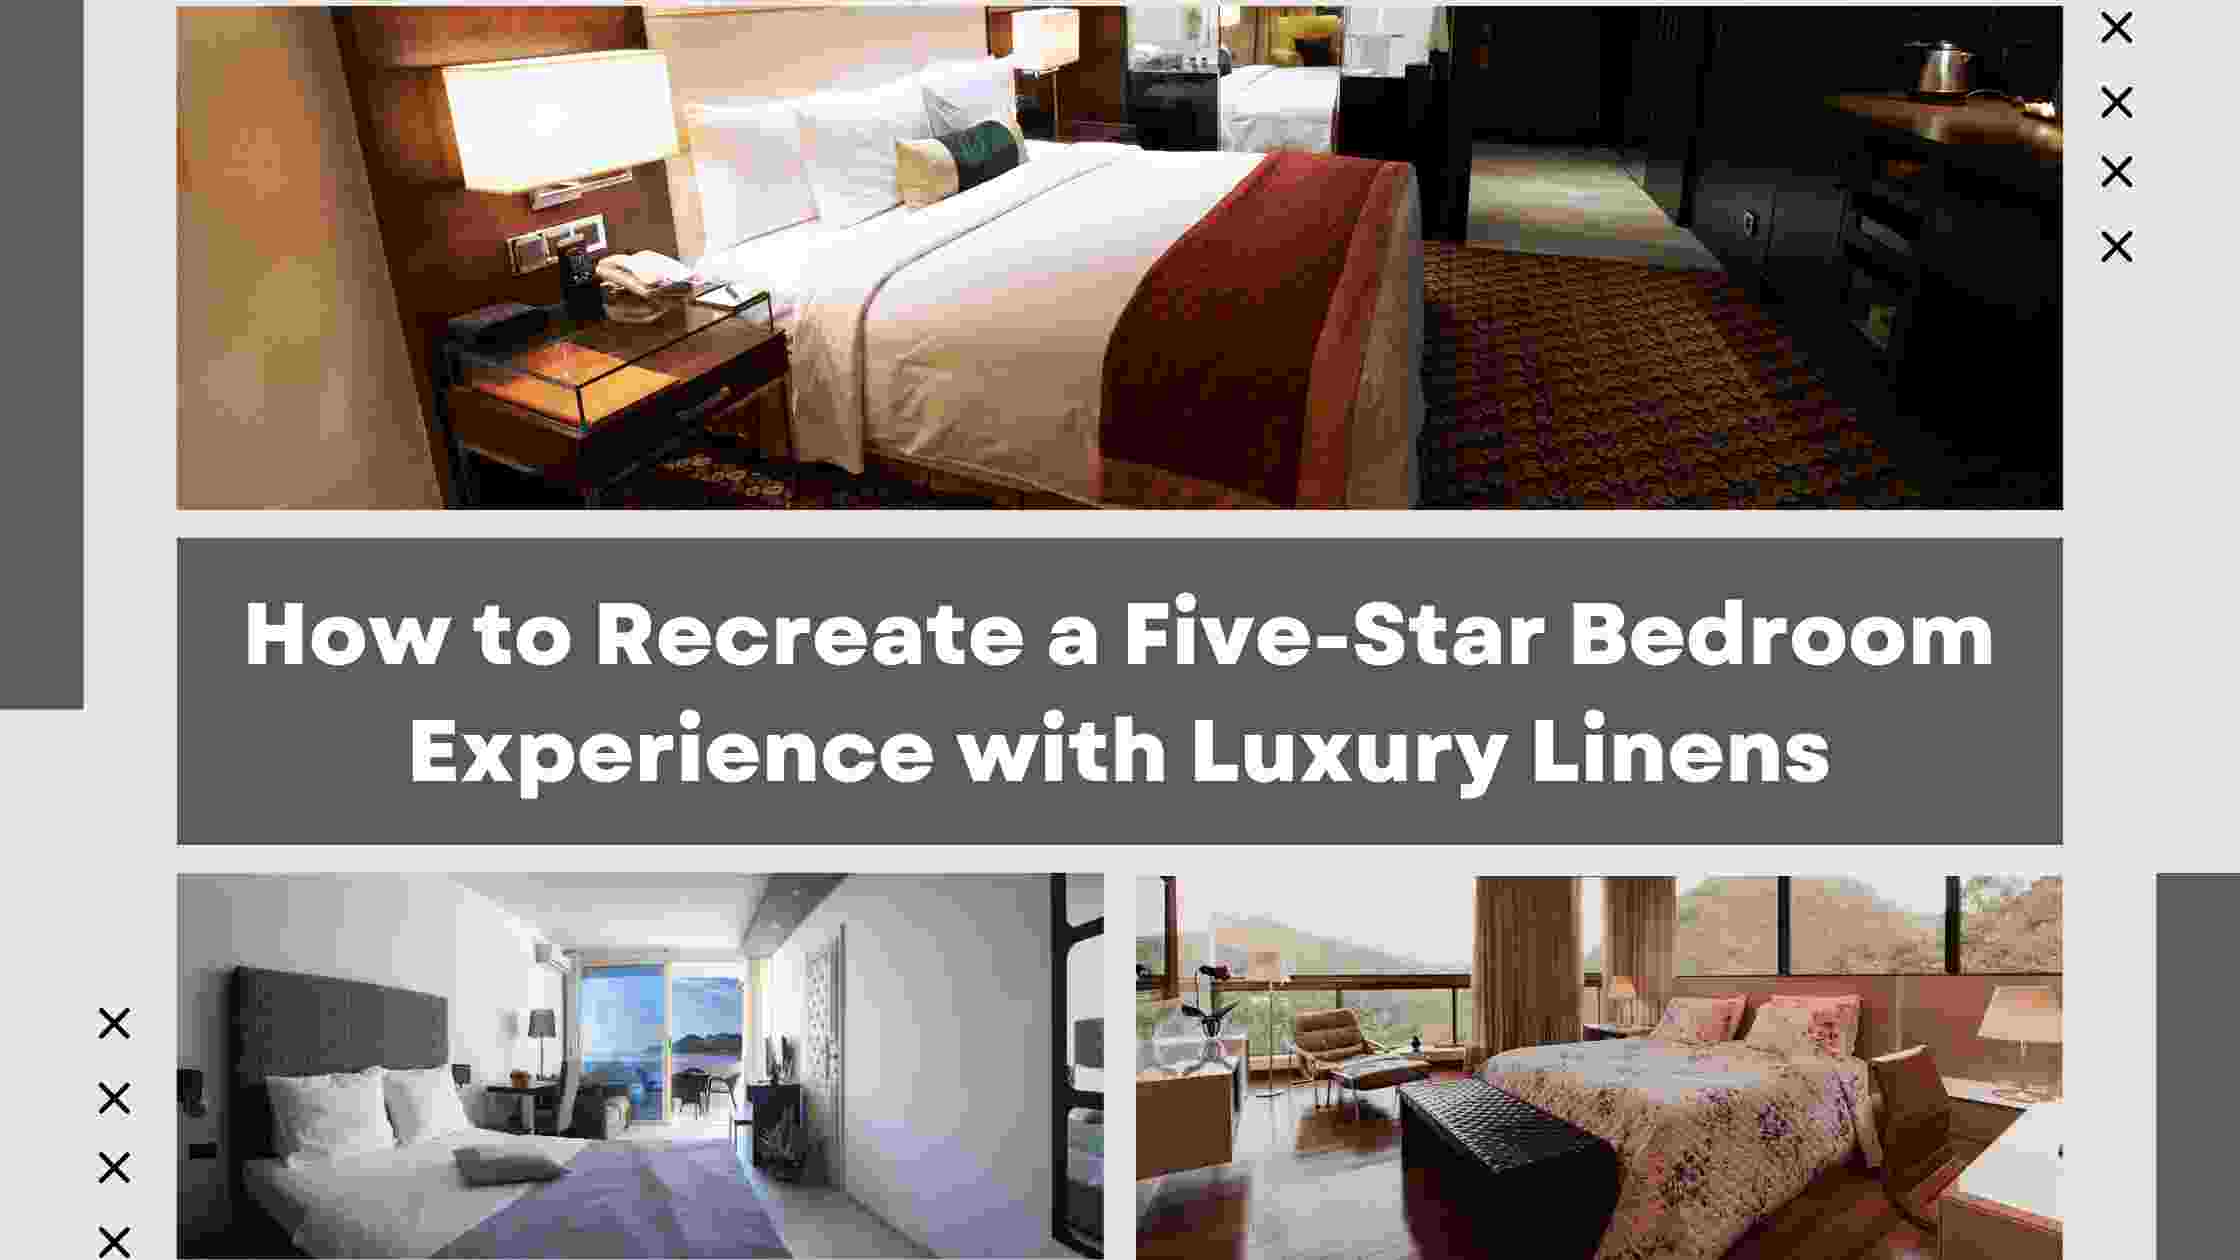 How to Recreate a Five-Star Bedroom Experience with Luxury Linens